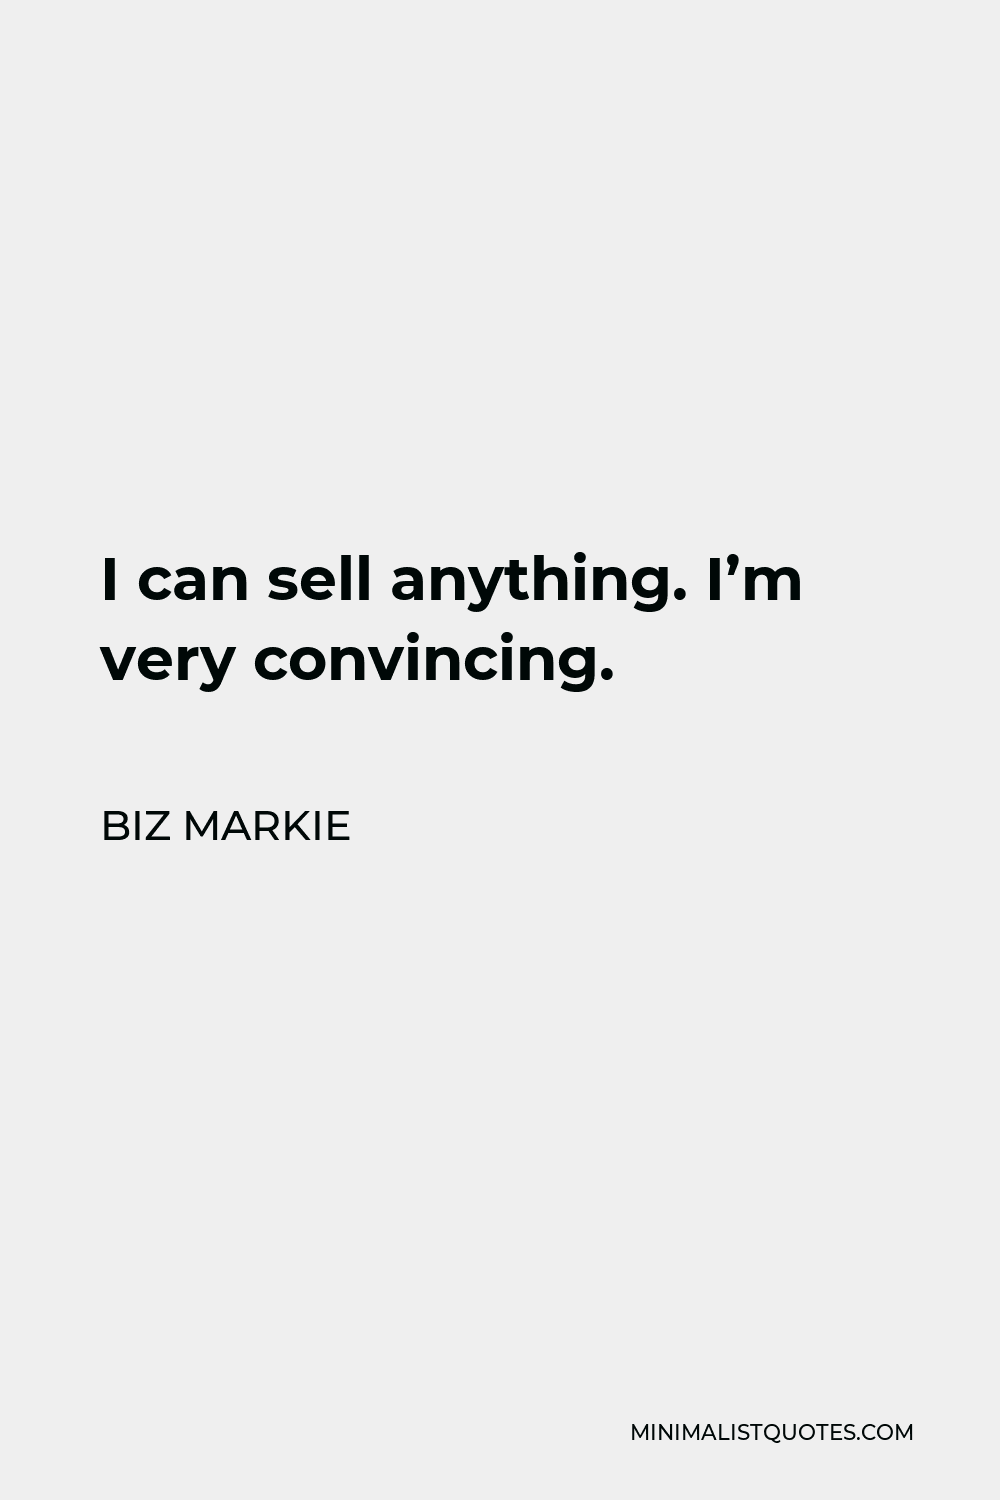 Biz Markie Quote: I can sell anything. I'm very convincing.